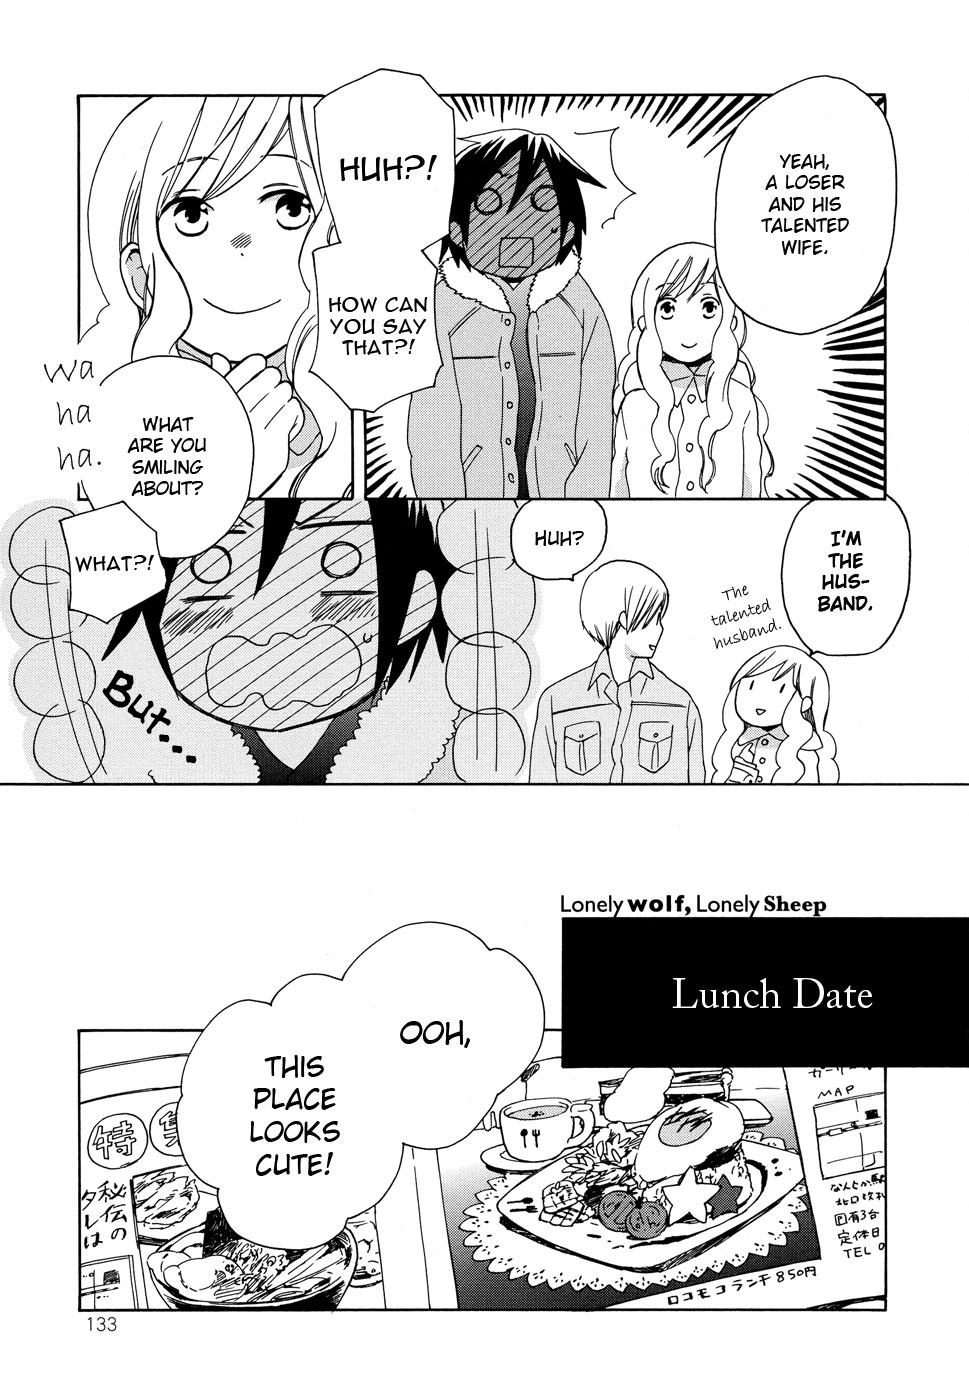 Lonely Wolf Lonely Sheep Vol. 1 Ch. 4.5 Extras